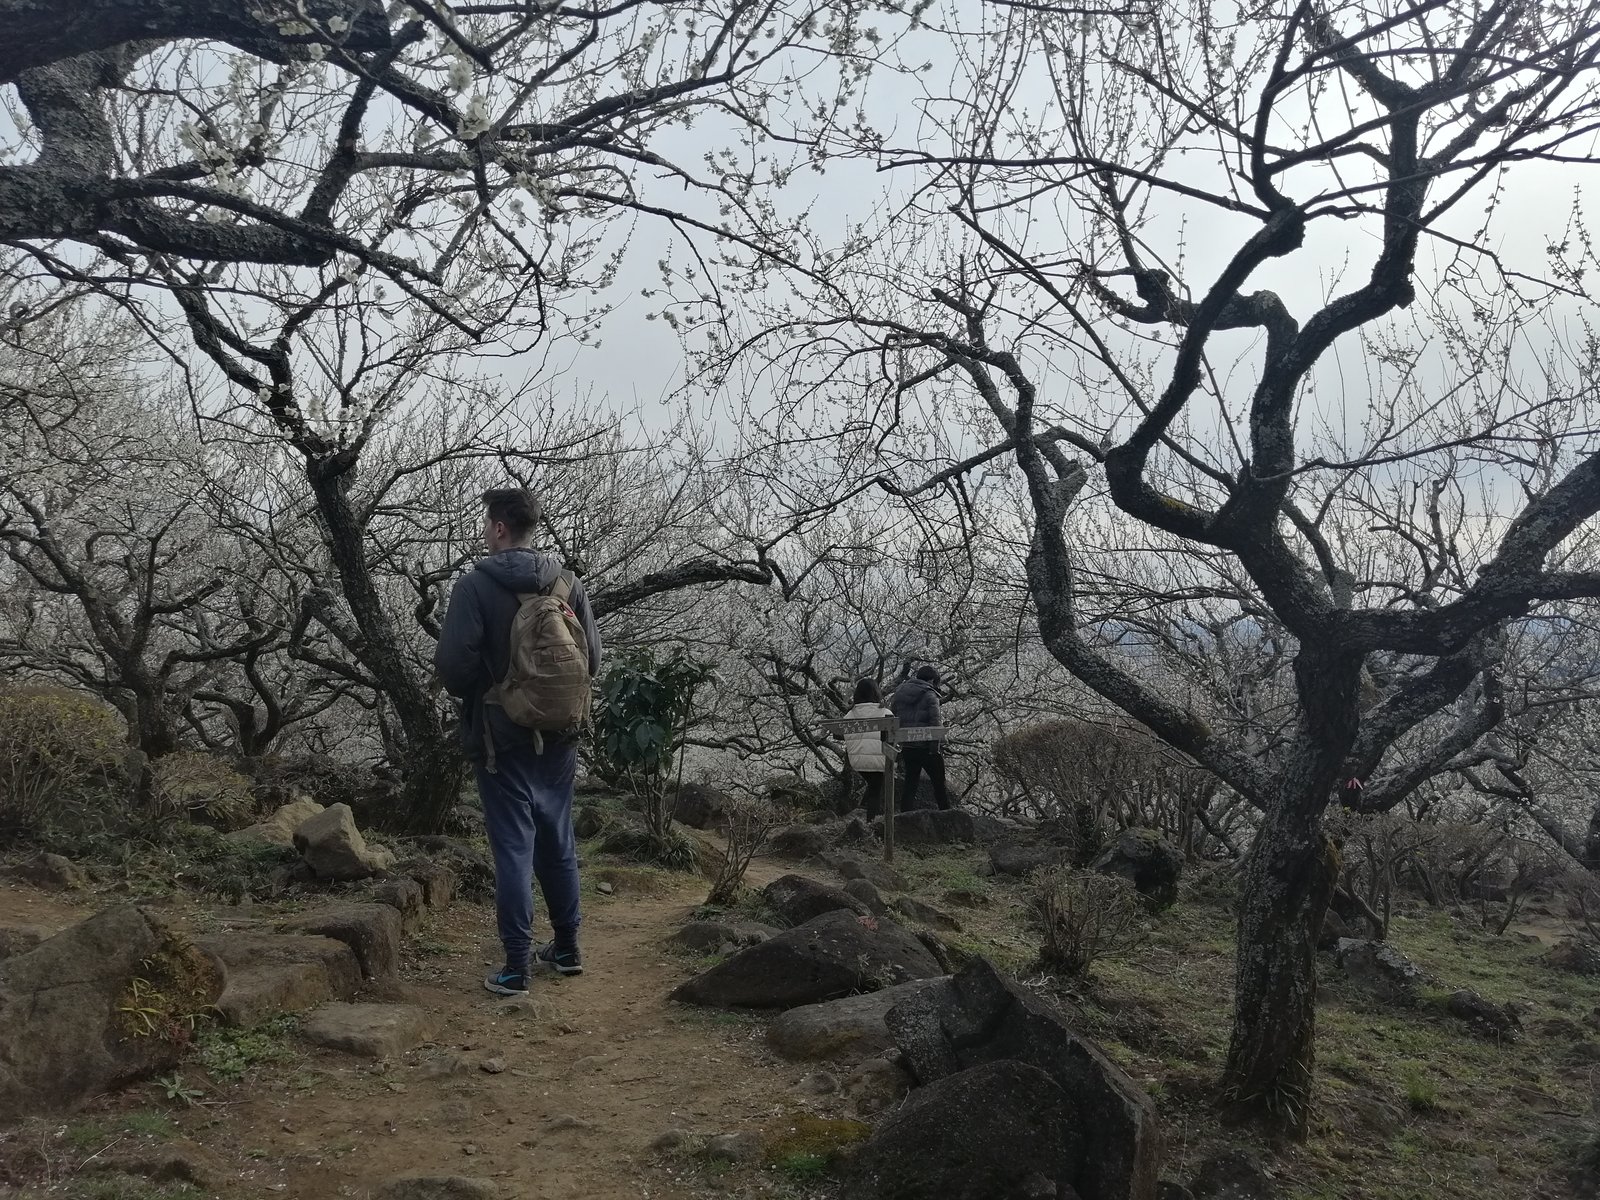 A man surrounded by plum trees